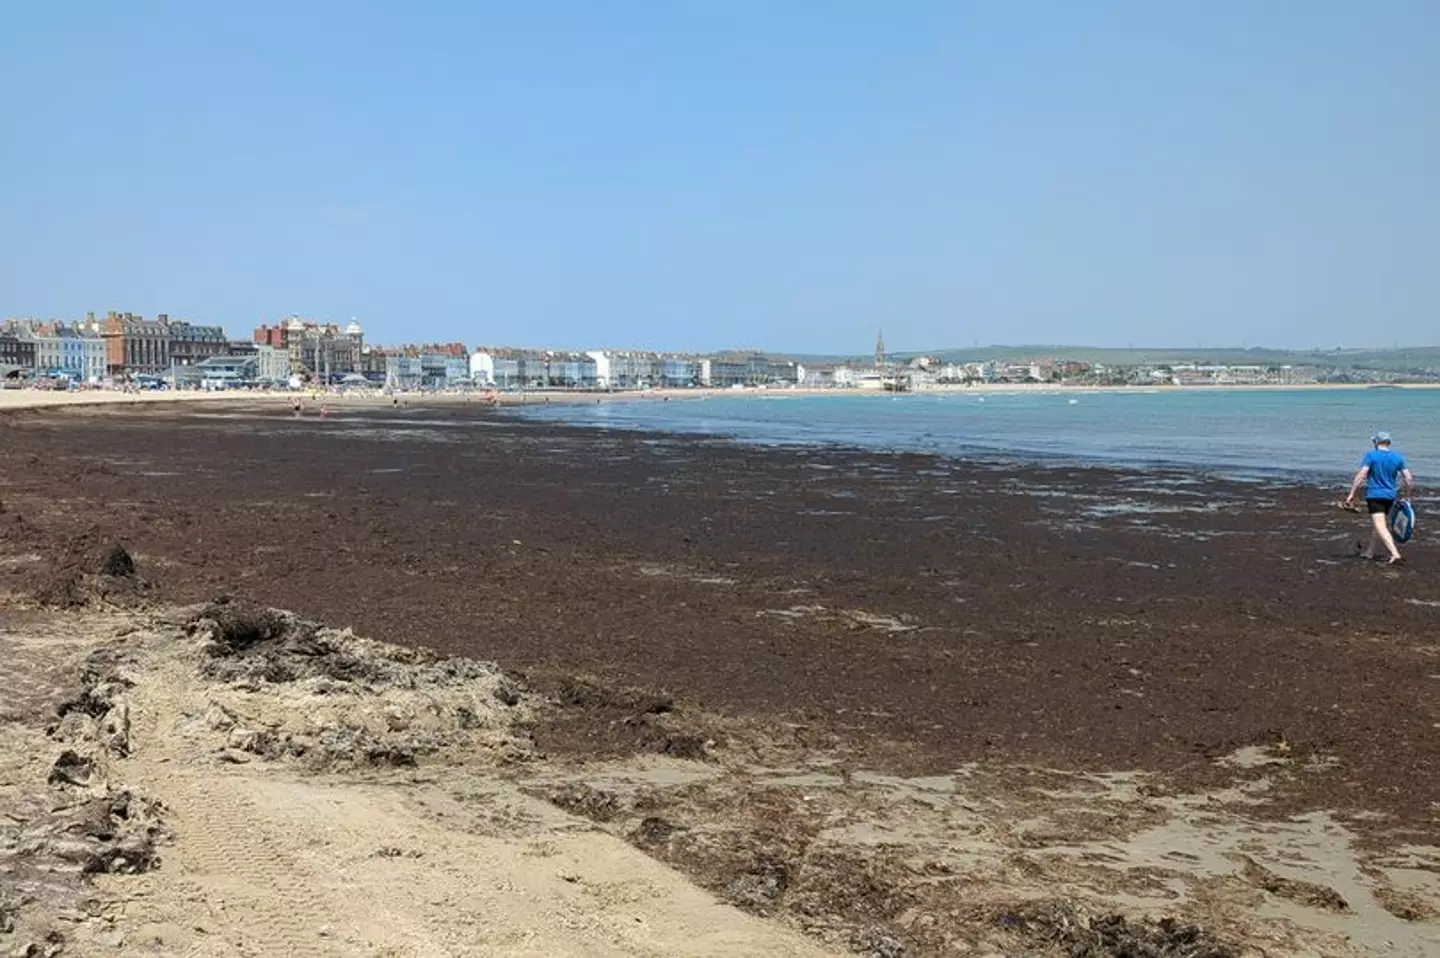 One visitor said the mass of seaweed had become 'a smelly and fly-infested carpet'.